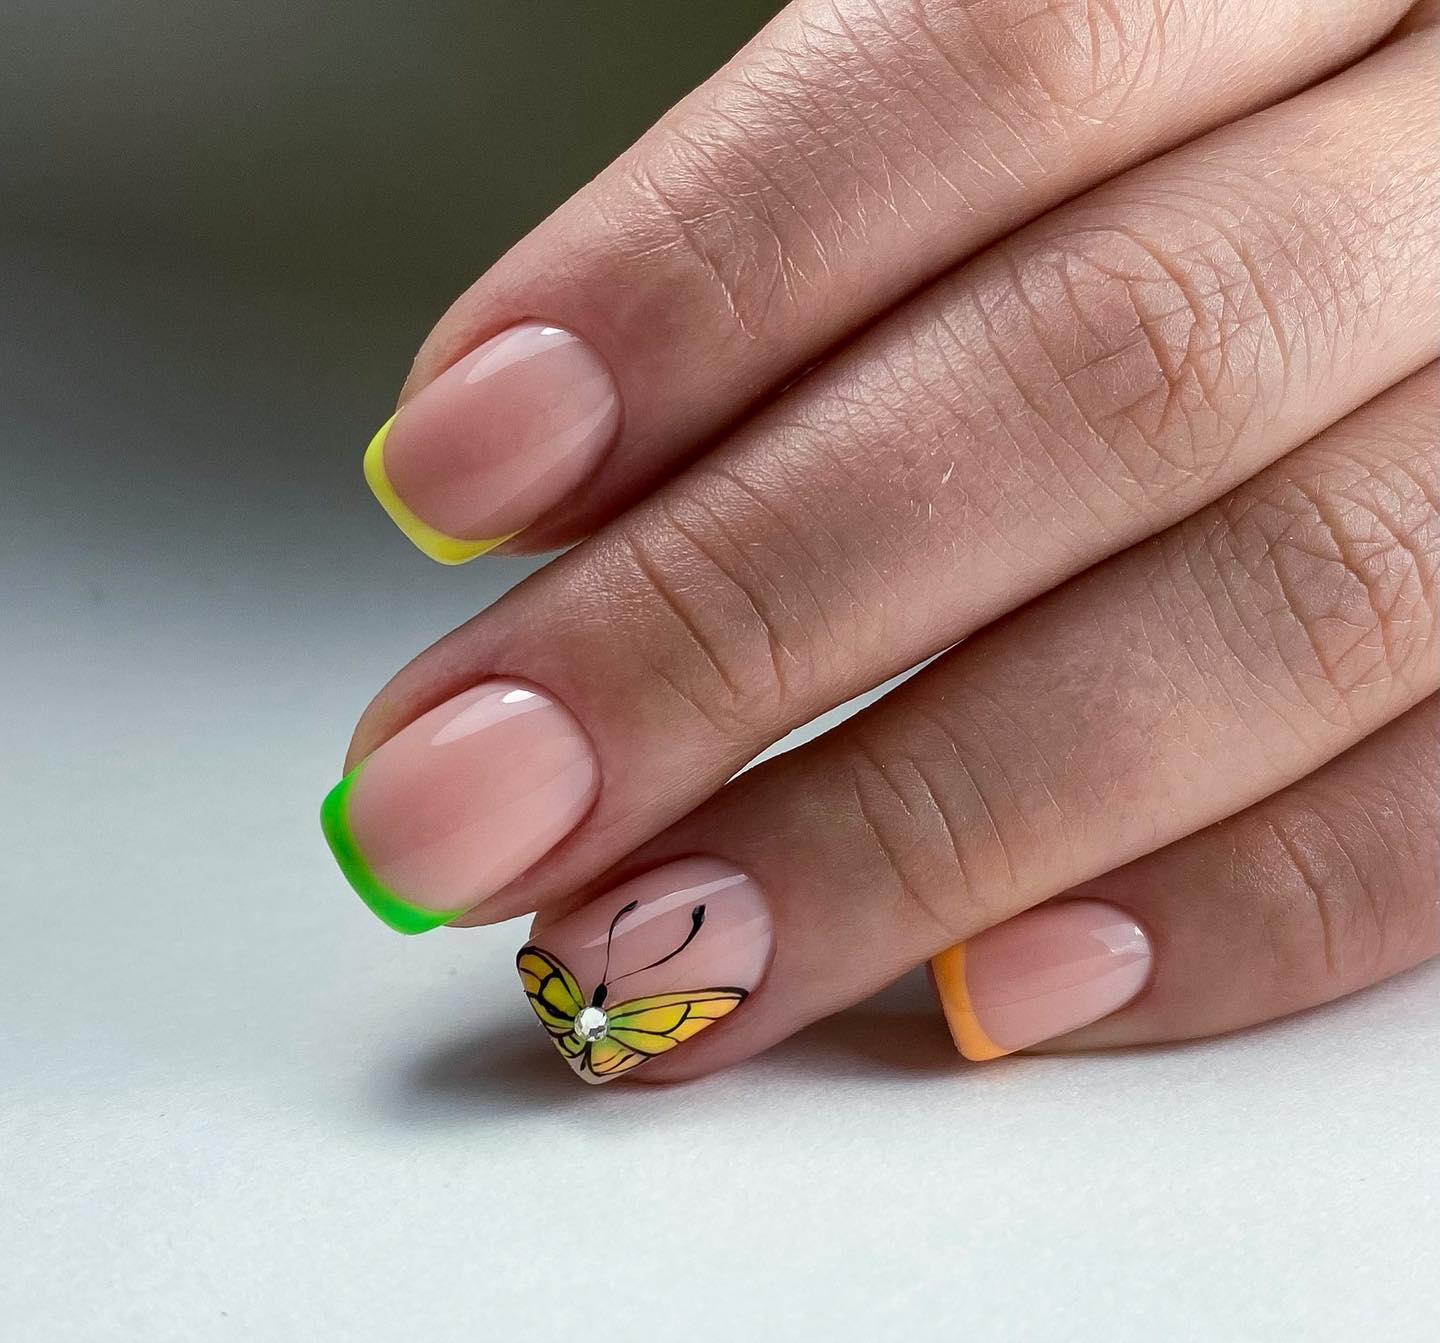 This French manicure will look amazing for the summer season! If you like bright and loud ideas this is for you.